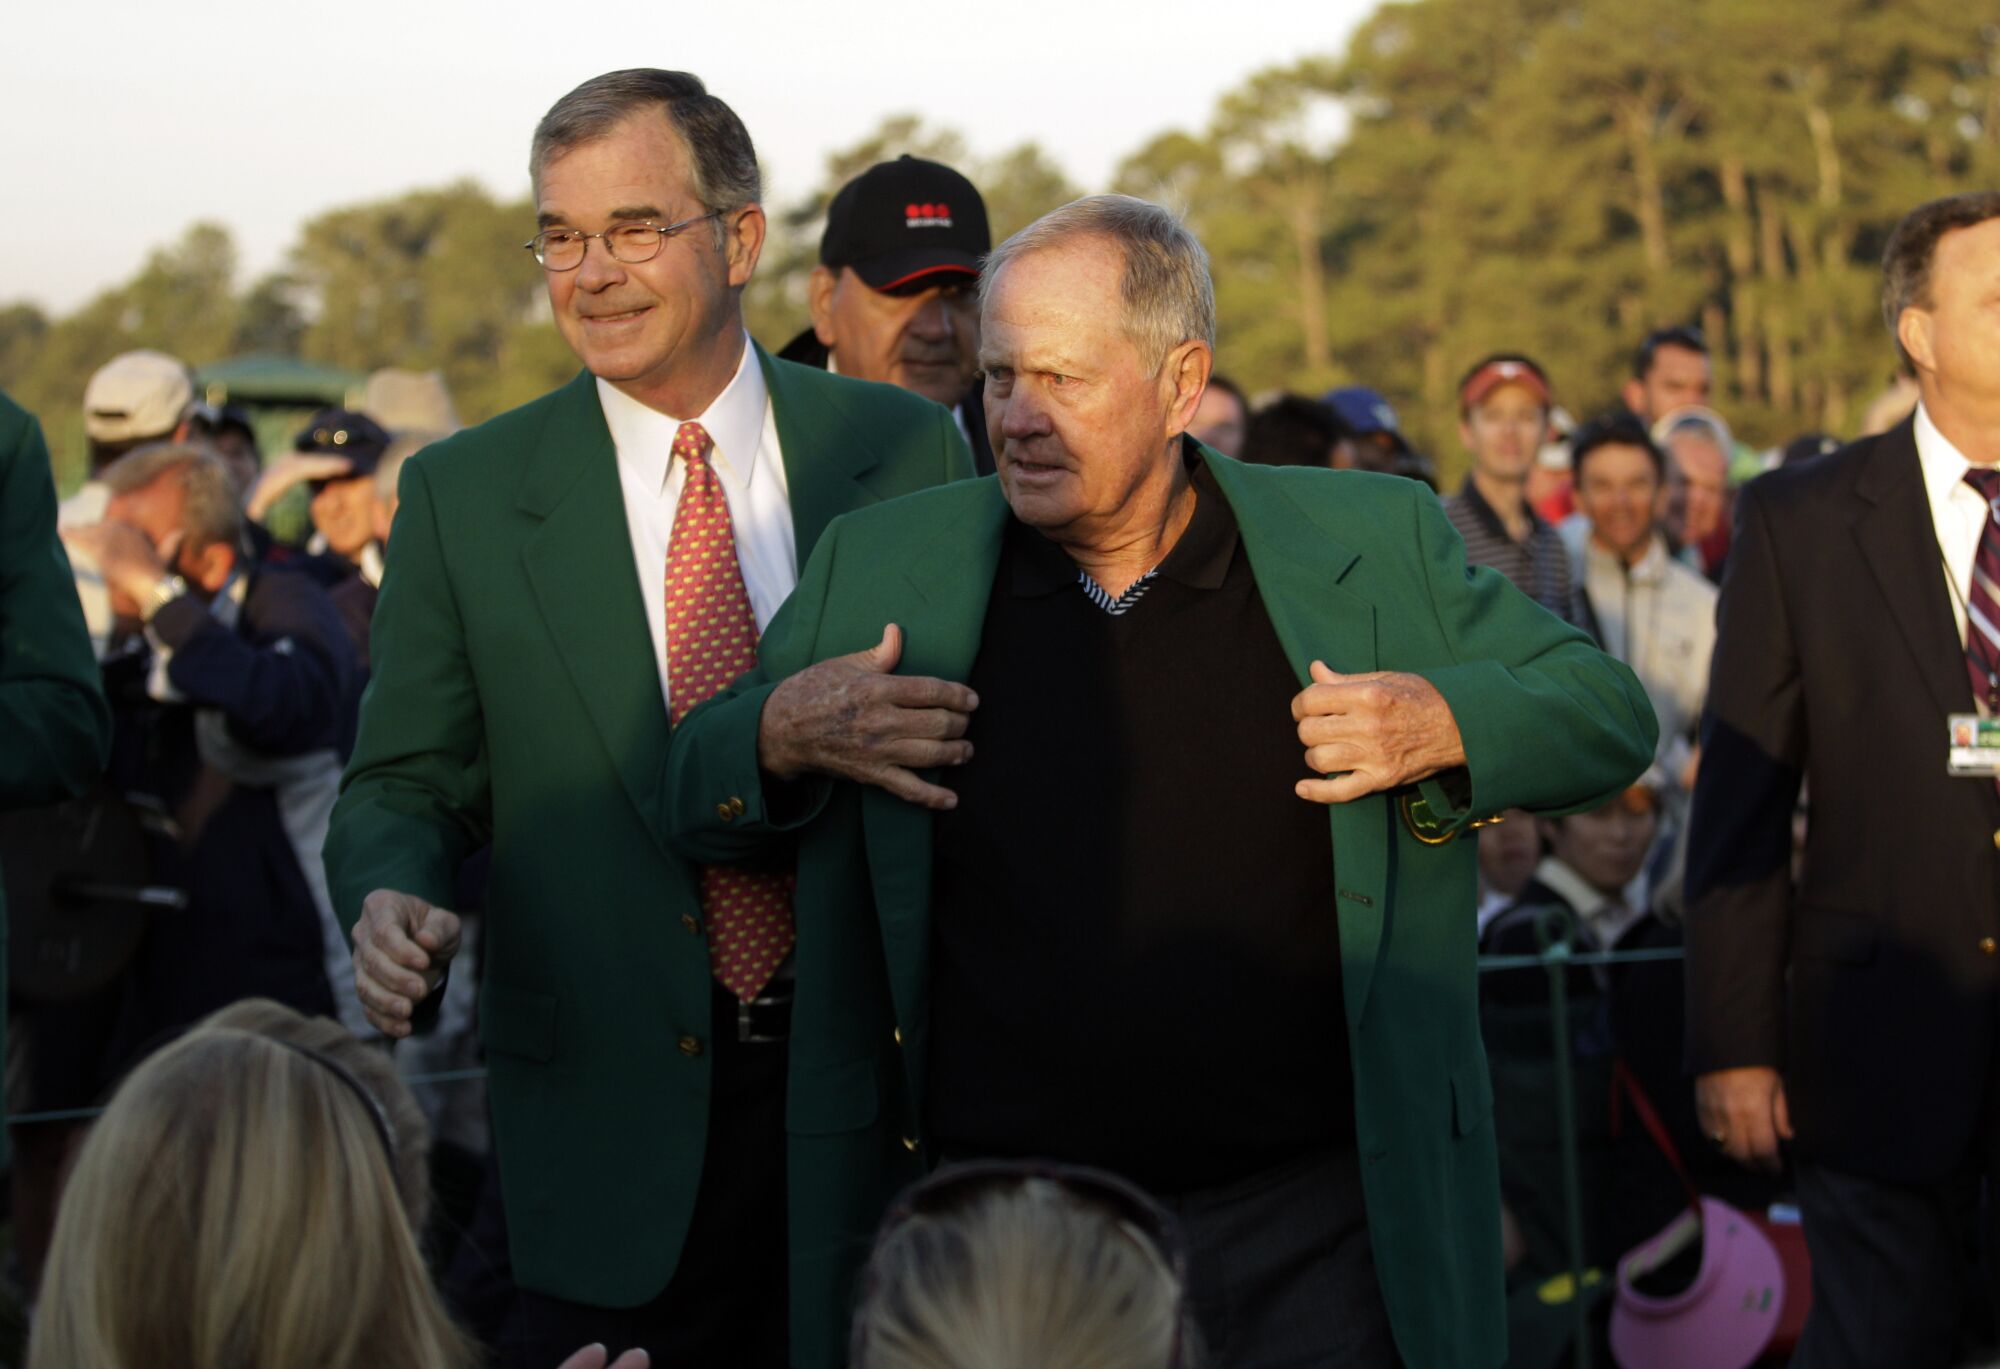 Jack Nicklaus, right, dons the green 2011 Masters jacket as Augusta National and Masters President Billy Payne looks on.